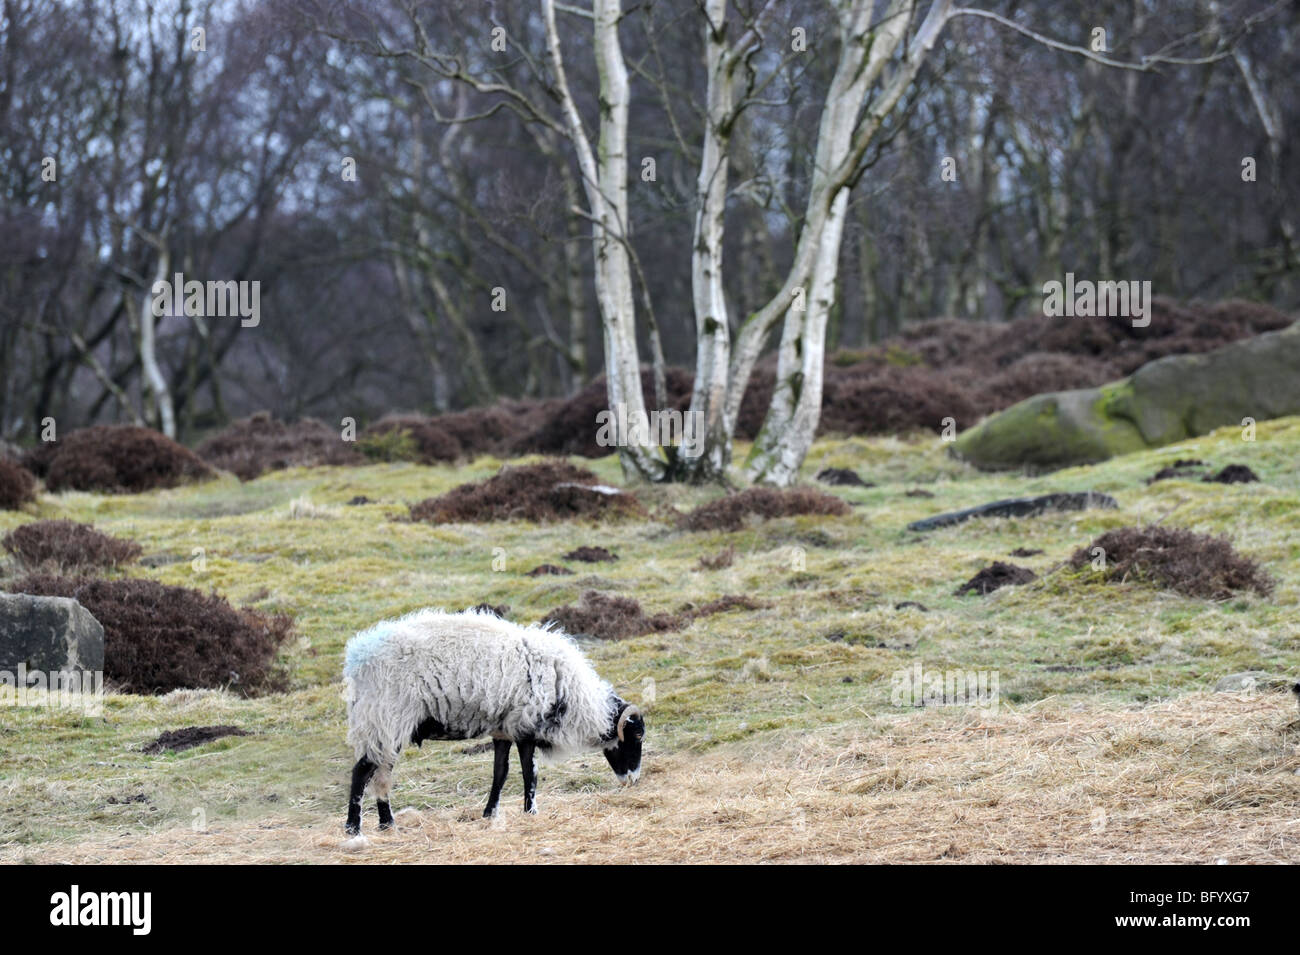 A Sheep feeding on grass in front of a clump of Silver Birch trees, Near Stanton in the Peak Derbyshire Peak District Stock Photo